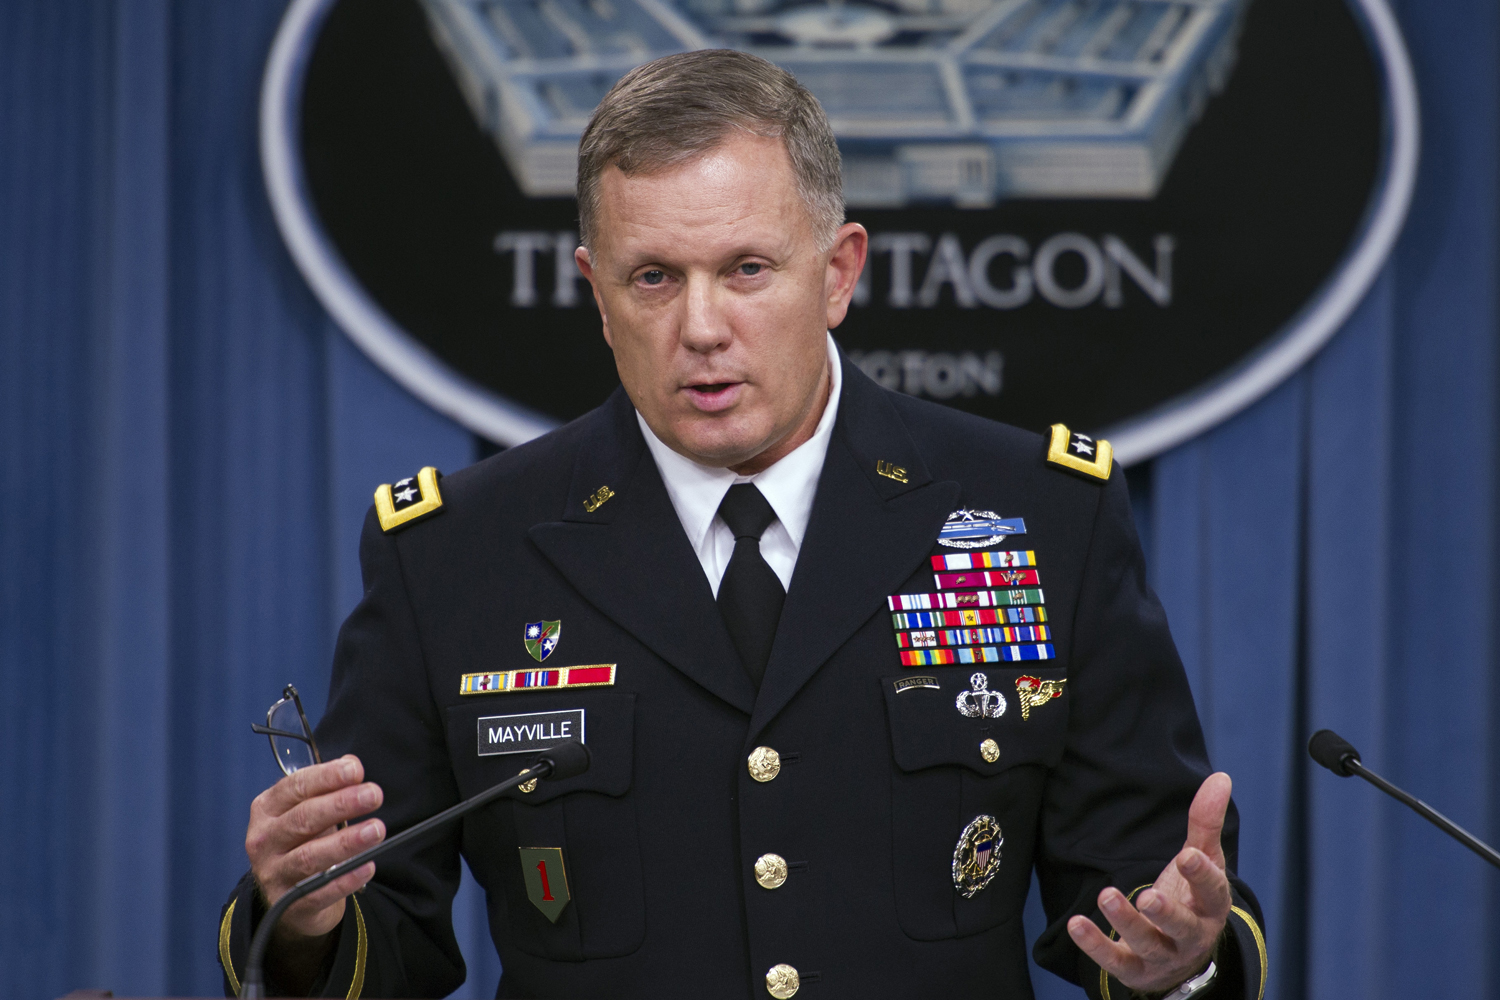 Army Lt. Gen. William Mayville, Jr., speaks about the operations to target the Khorasan Group in Syria on Tuesday, Sept. 23, 2014, during a news conference at the Pentagon. (Cliff Owen—AP)